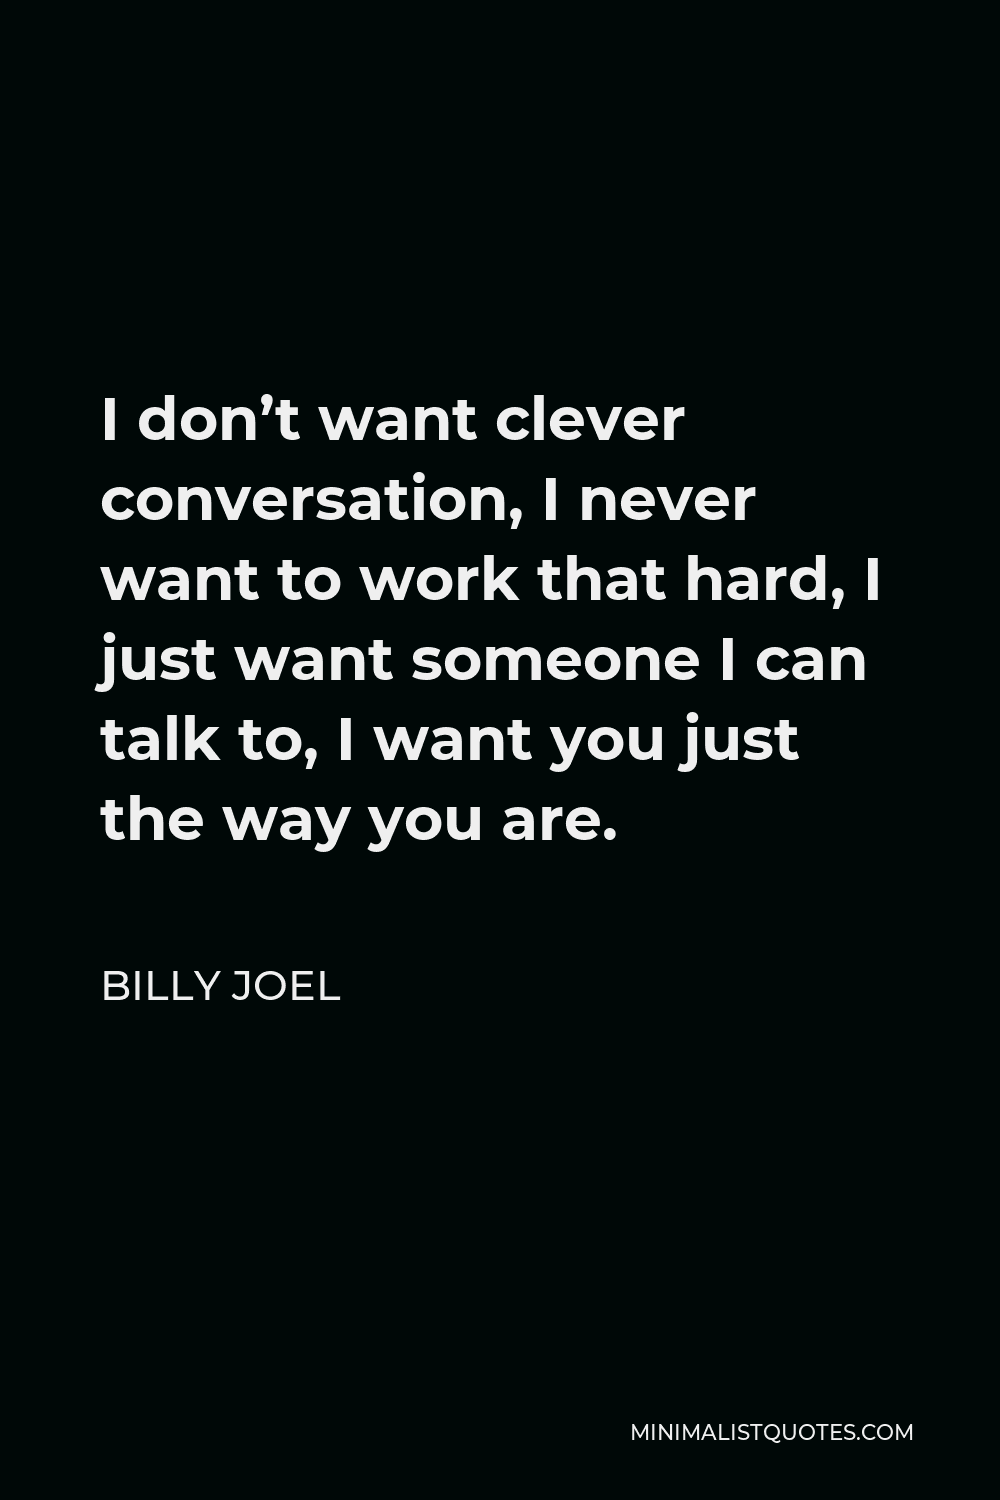 Billy Joel Quote - I don’t want clever conversation, I never want to work that hard, I just want someone I can talk to, I want you just the way you are.